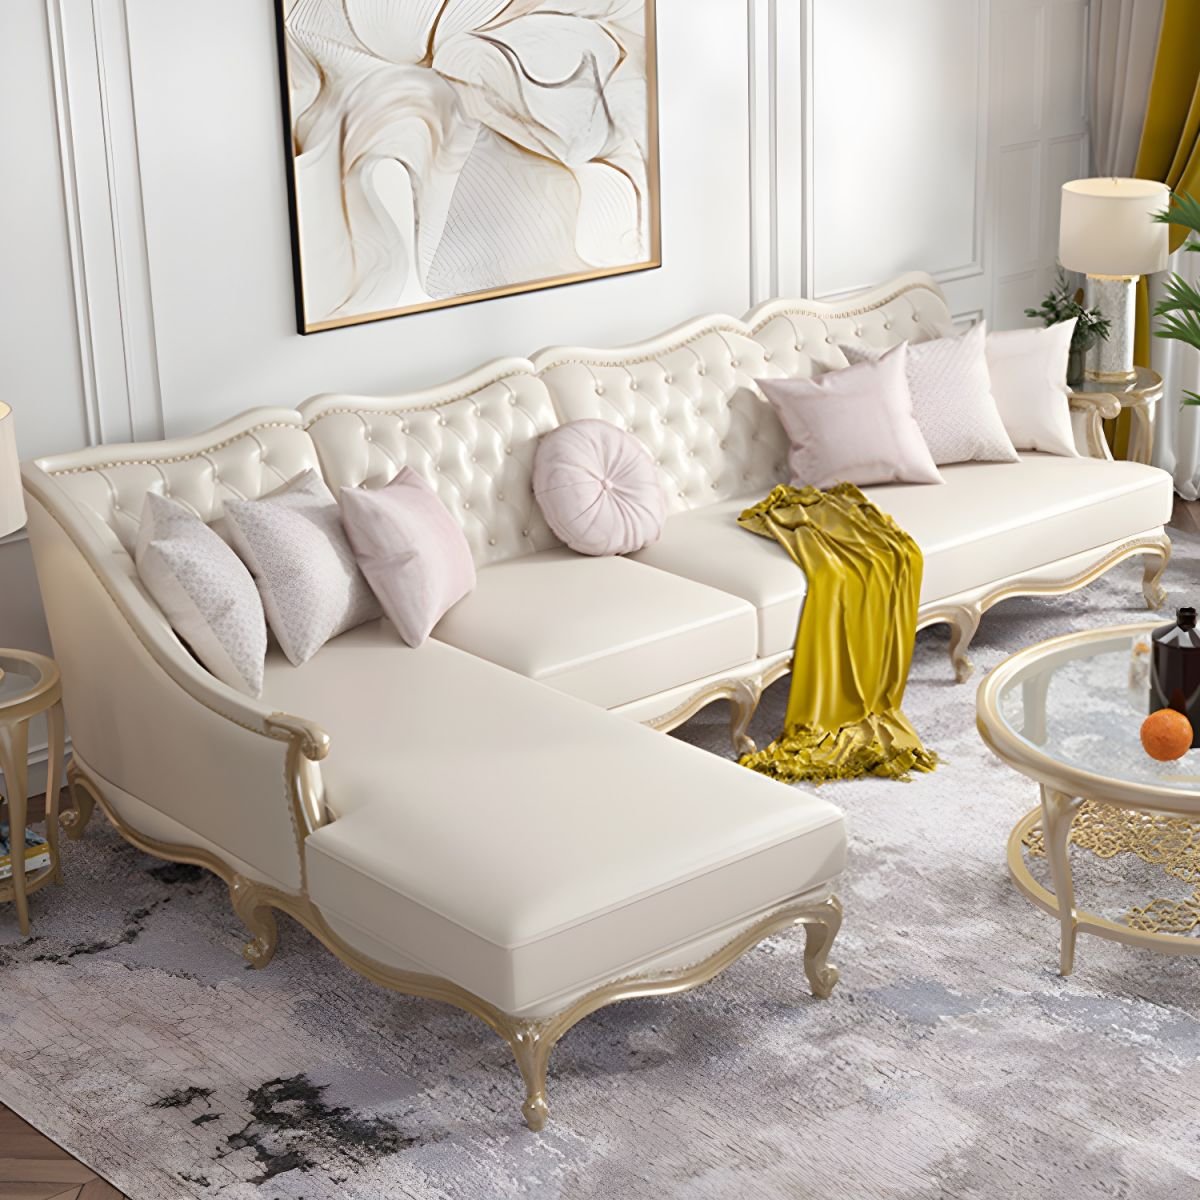 Glam Beige Nappa Stationary Sectional Sofa with Tufted Back and Nailhead Trim - 136"L x 77"W x 38"H Nappa Right